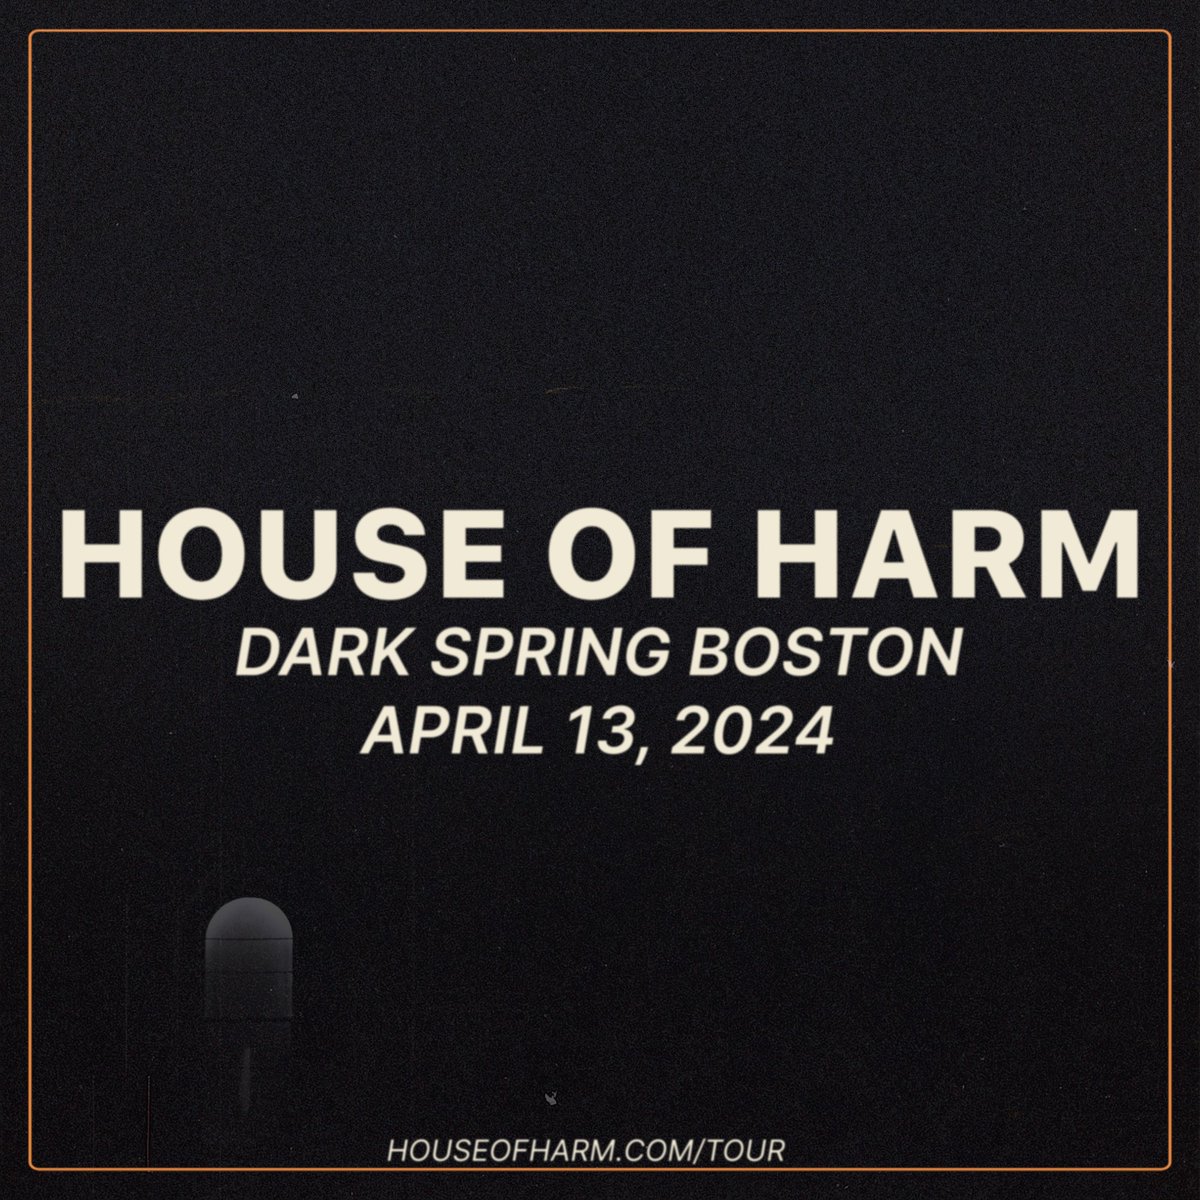 BOSTON - Exactly 1 month from today we'll be playing at Dark Spring Can’t wait to catch up xox🗡️🗡️🗡️ Tix: tinyurl.com/HOHDarkSpring